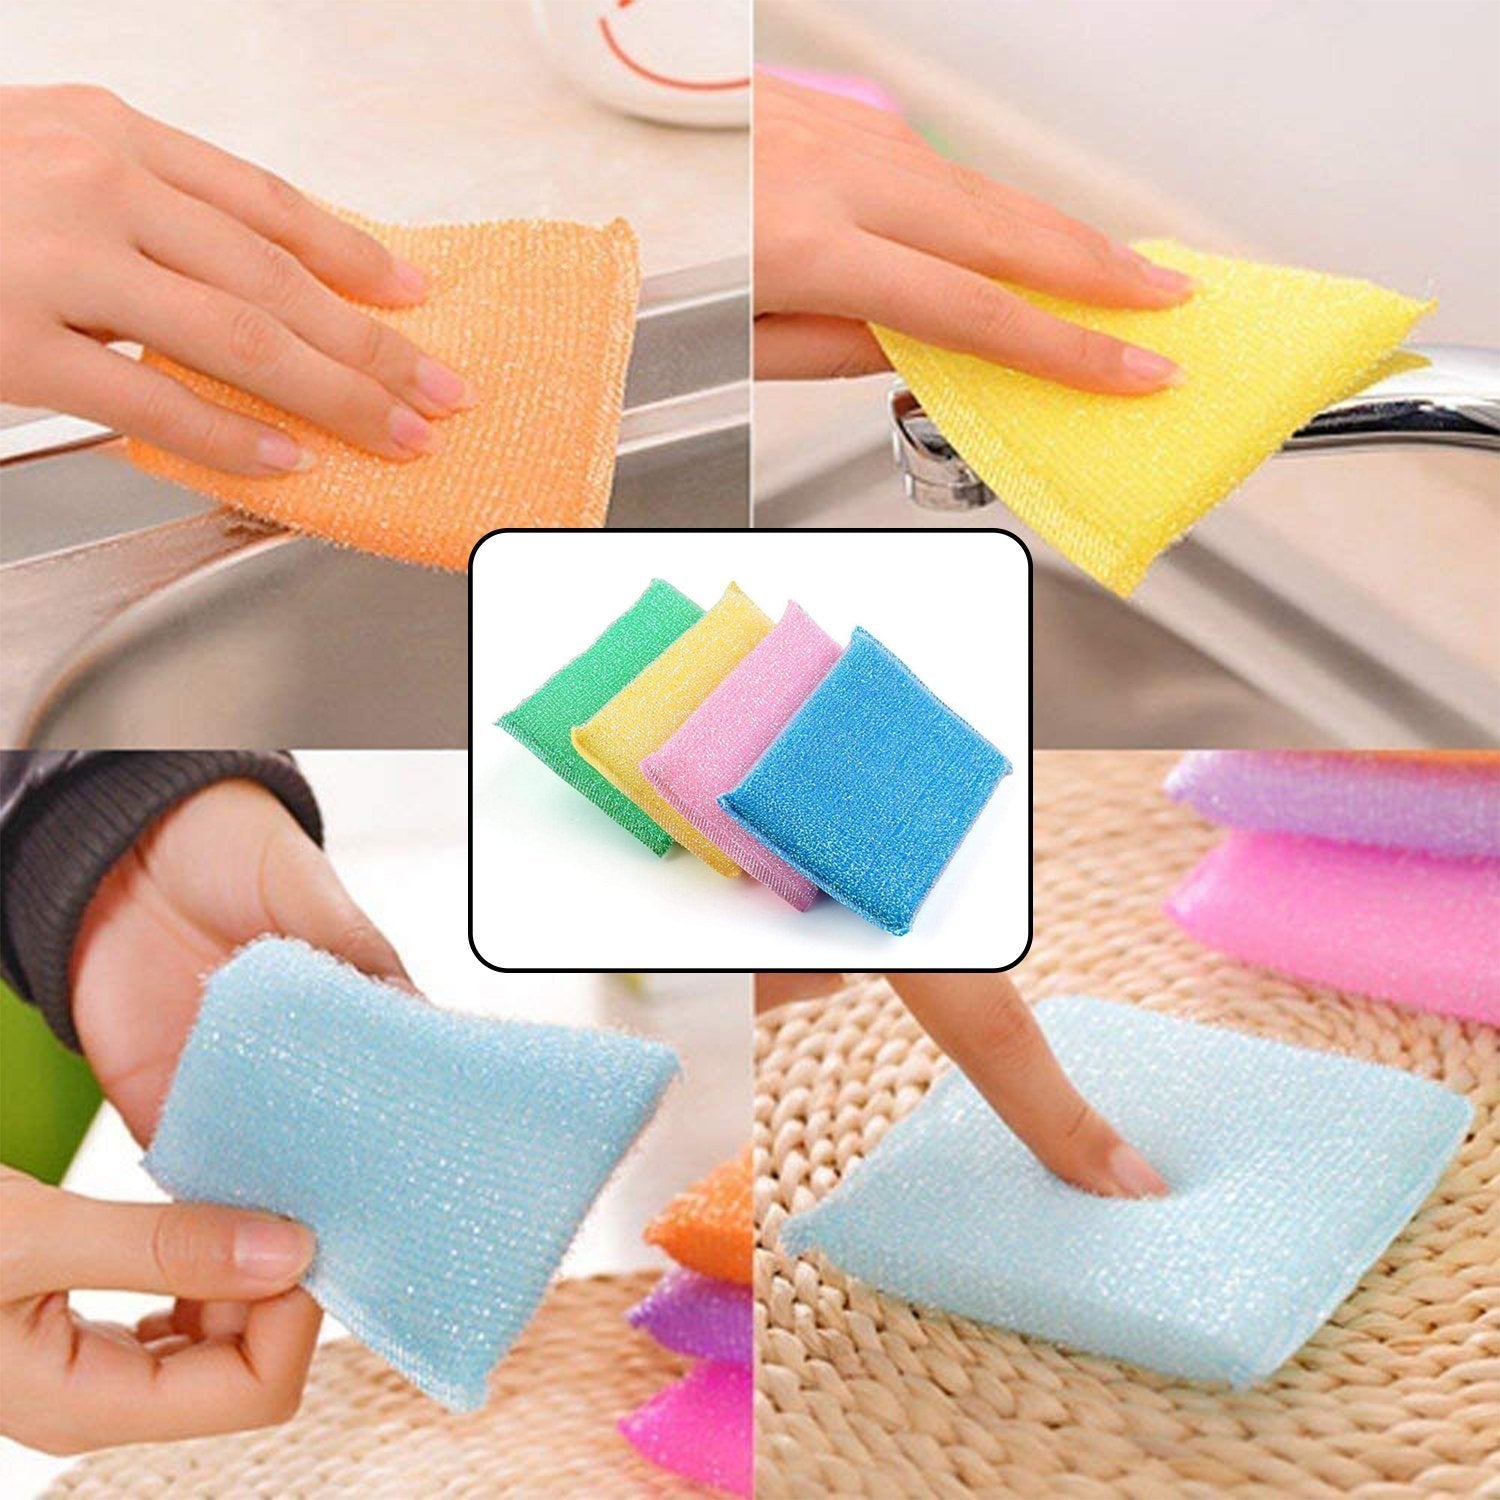 2626 Scratch Proof Kitchen Utensil Scrubber Pad (Pack of 12)